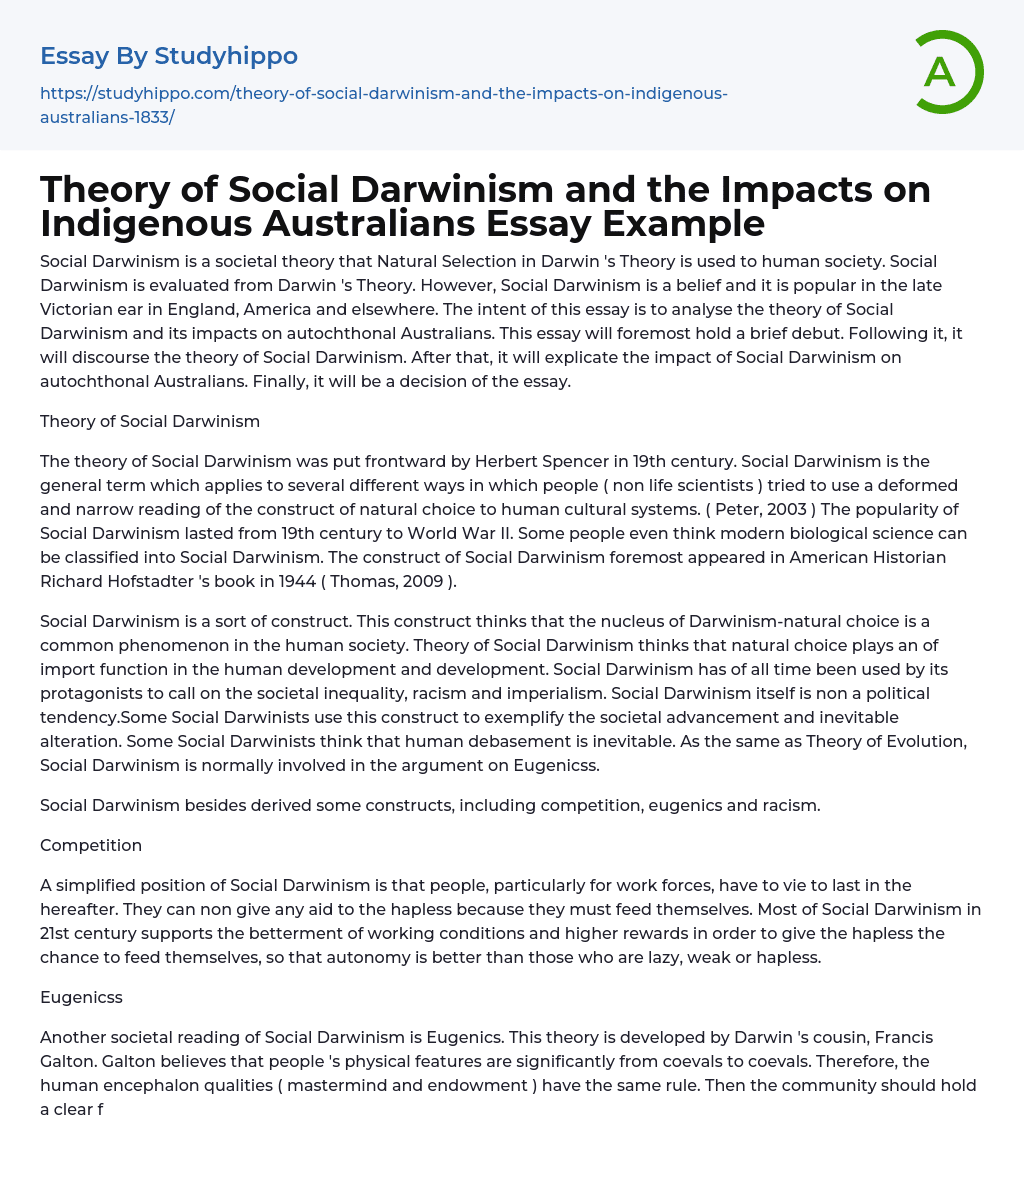 Theory of Social Darwinism and the Impacts on Indigenous Australians Essay Example